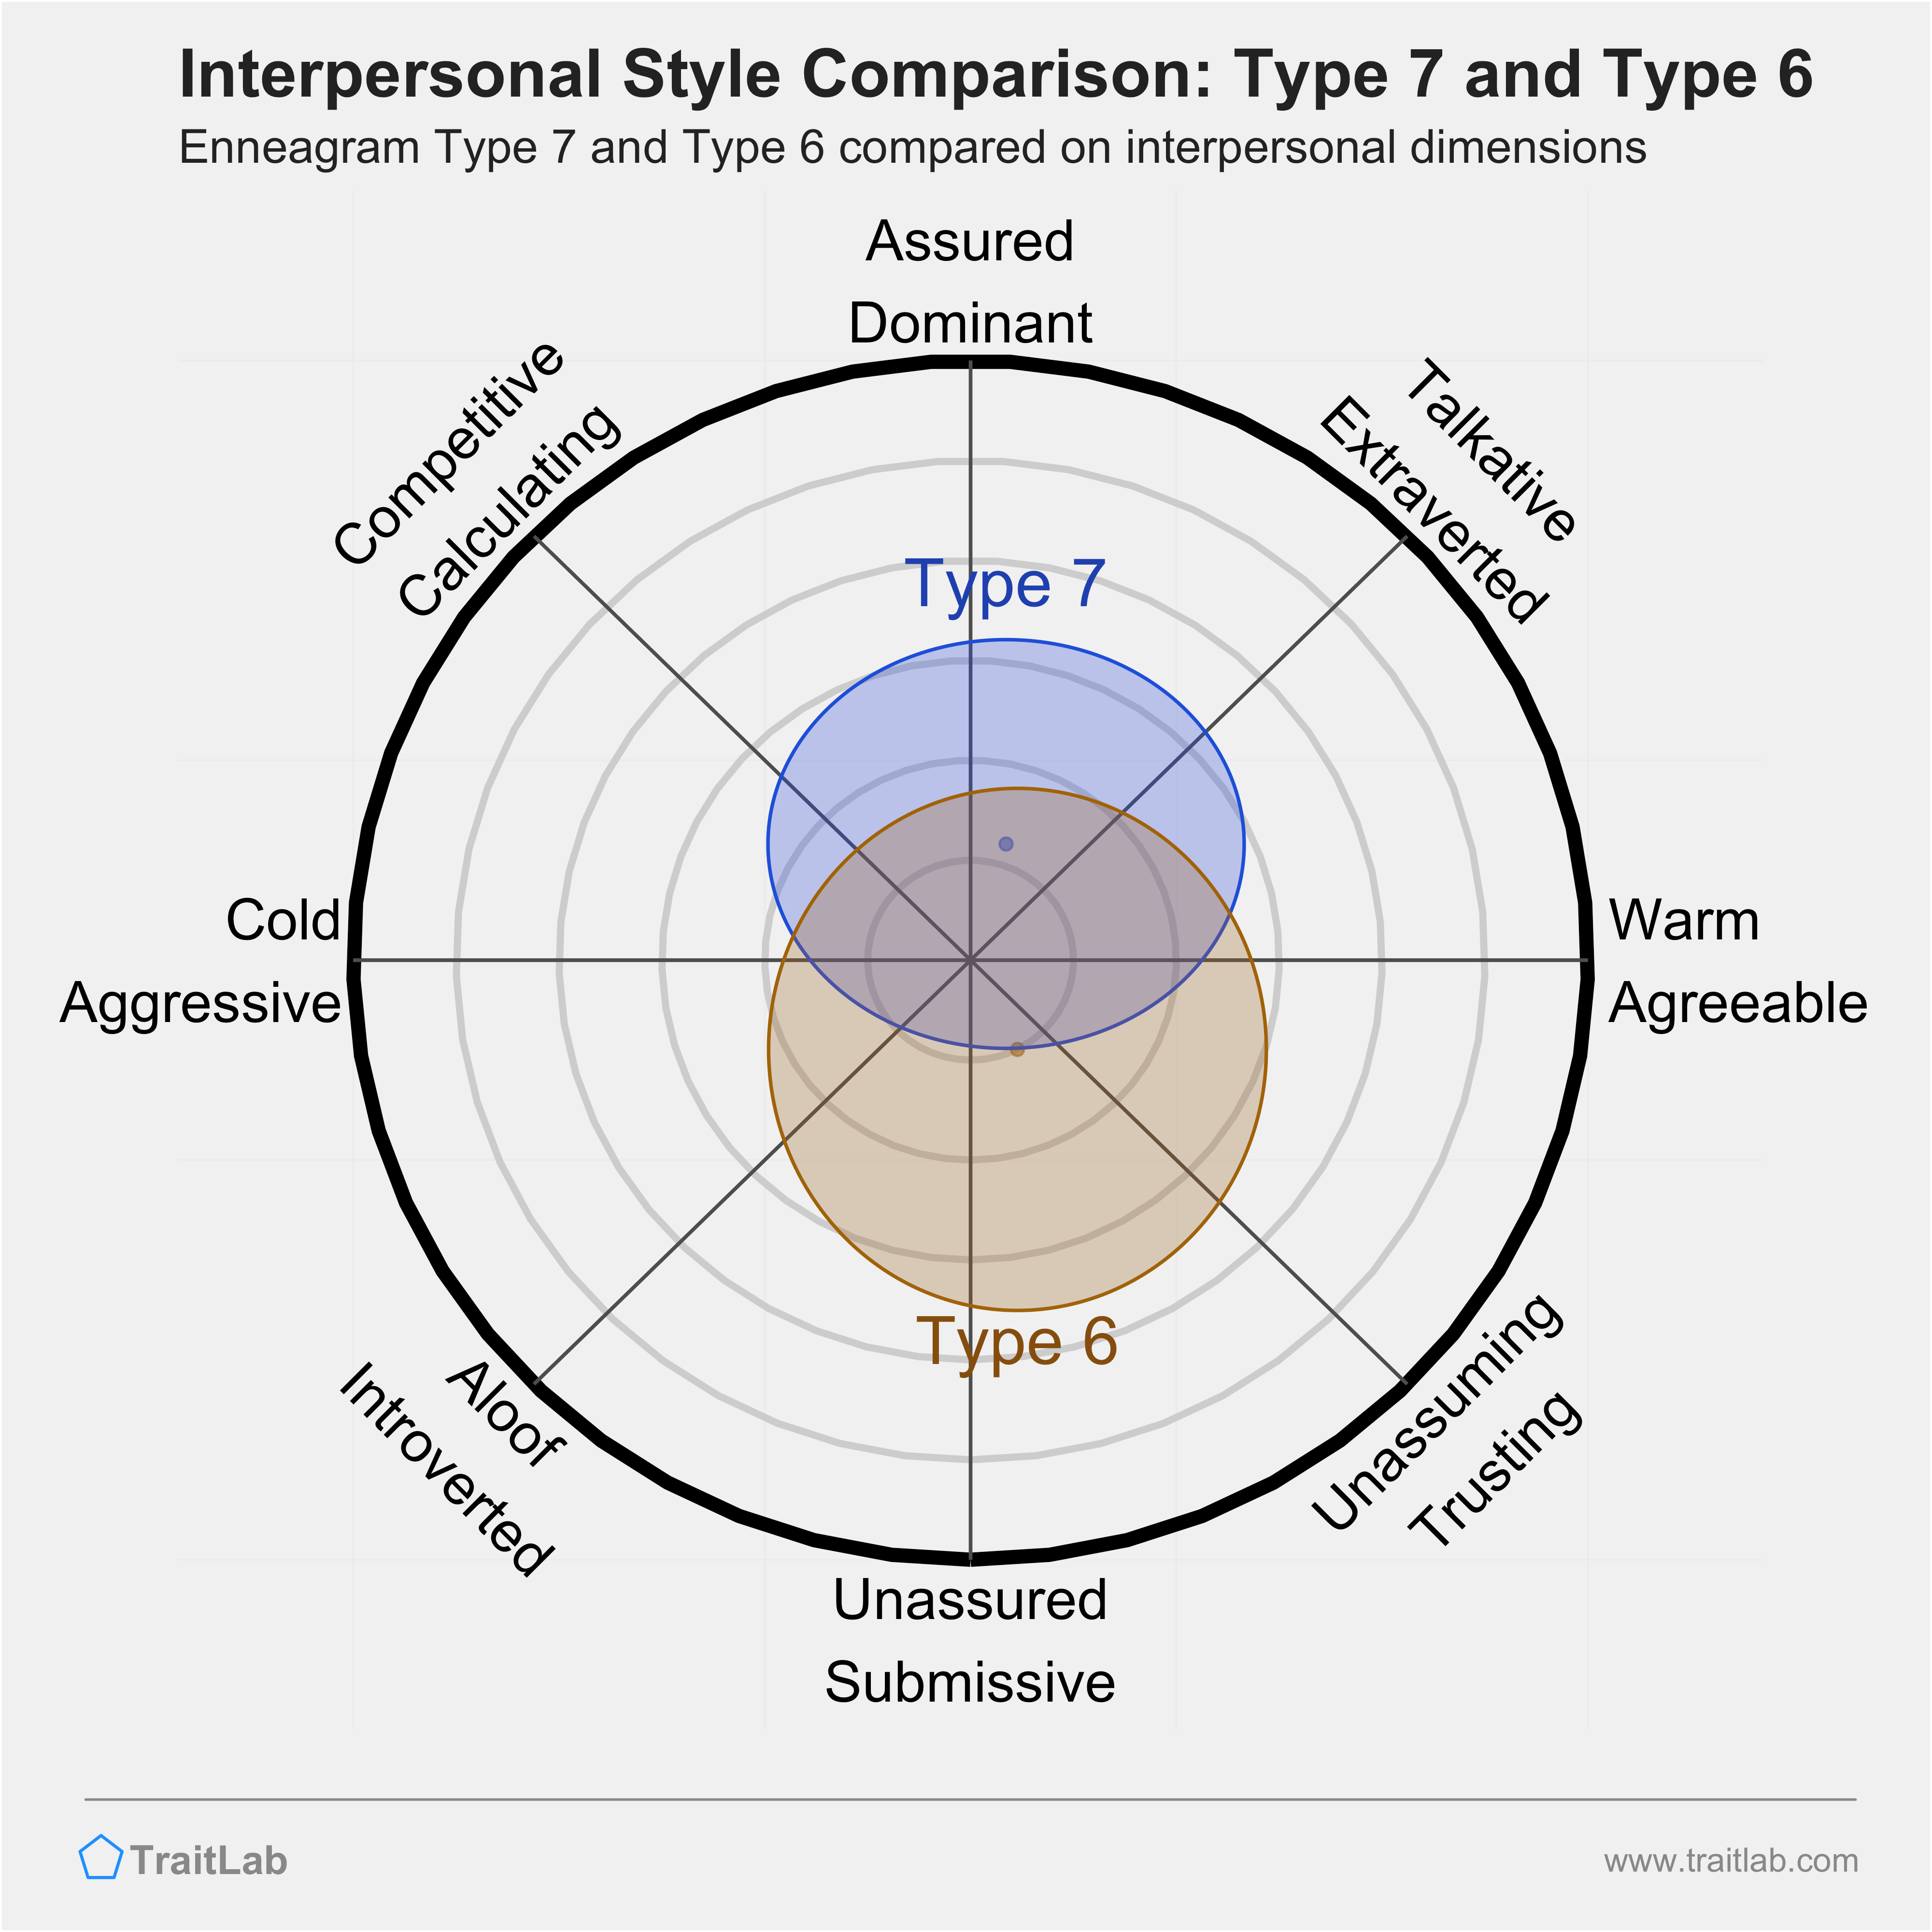 Enneagram Type 7 and Type 6 comparison across interpersonal dimensions